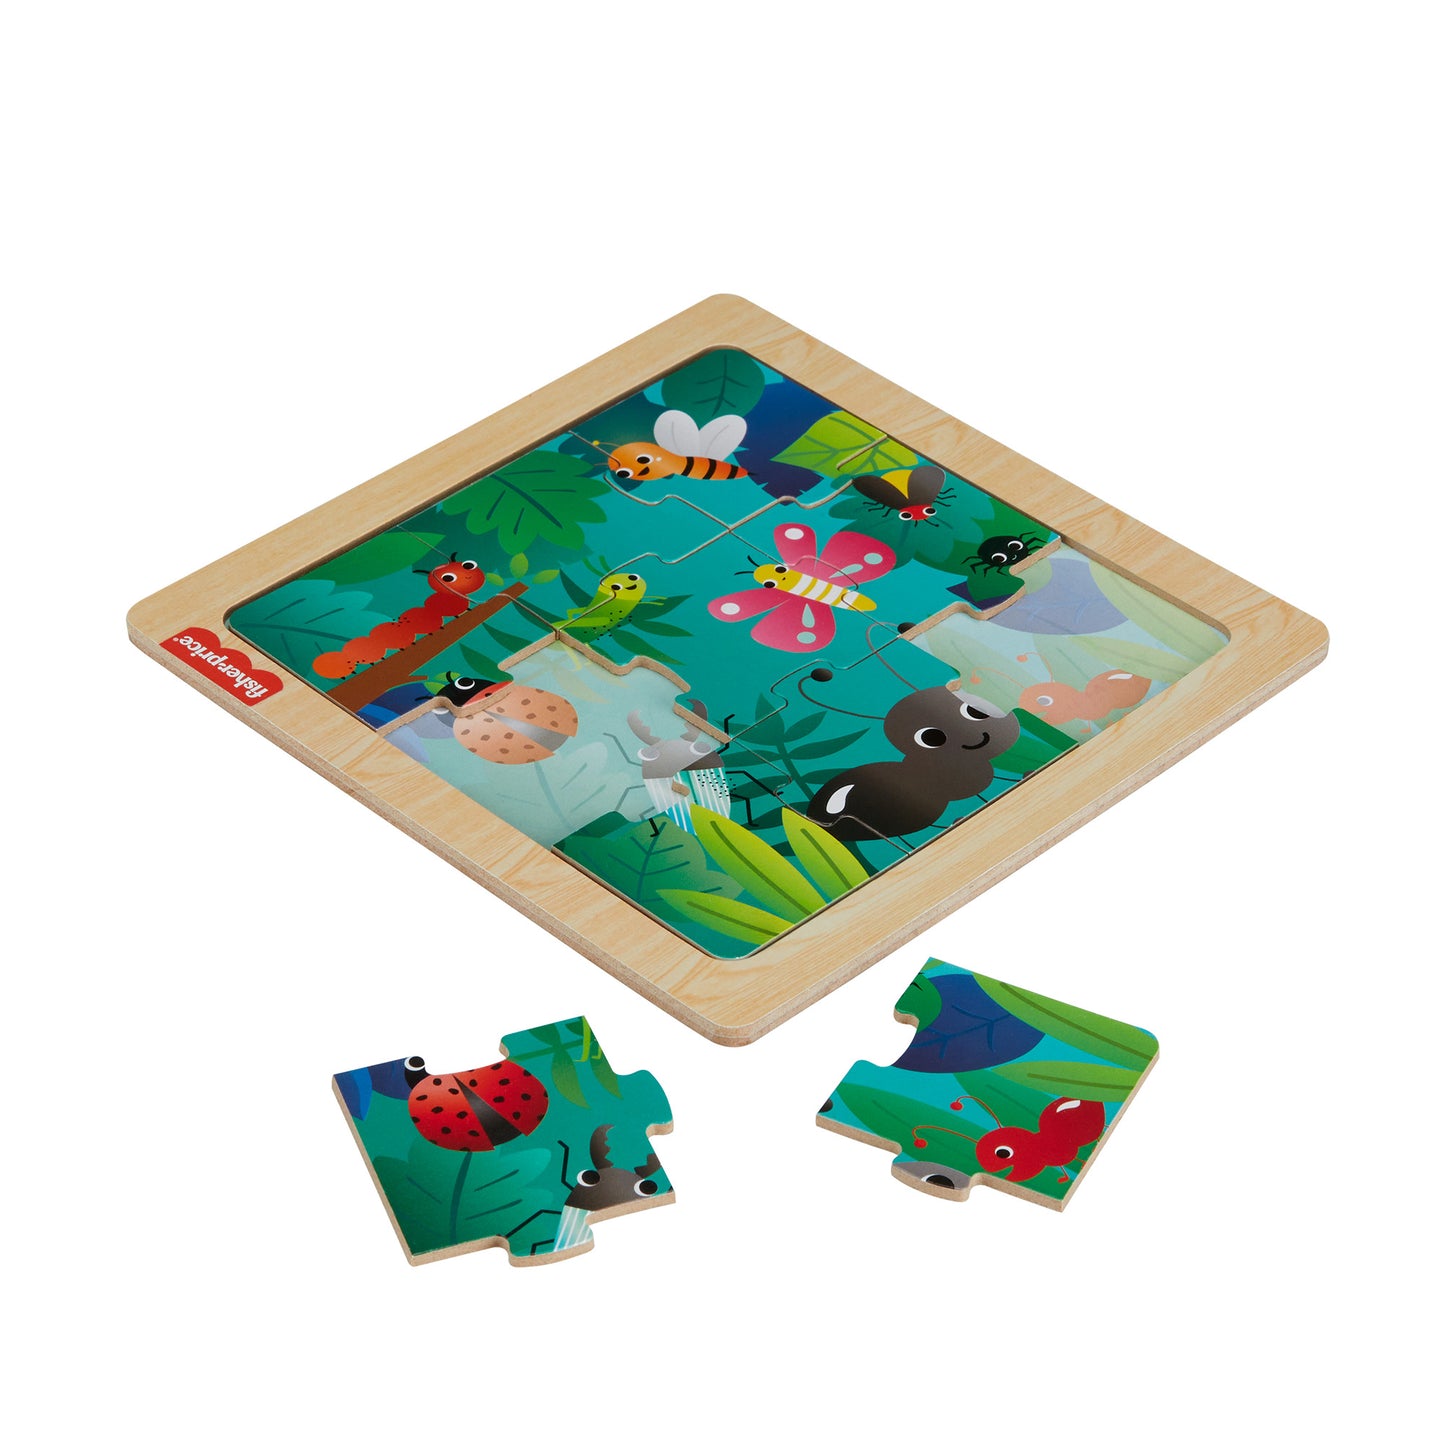 Fisher-Price Wooden Jigsaw Puzzle